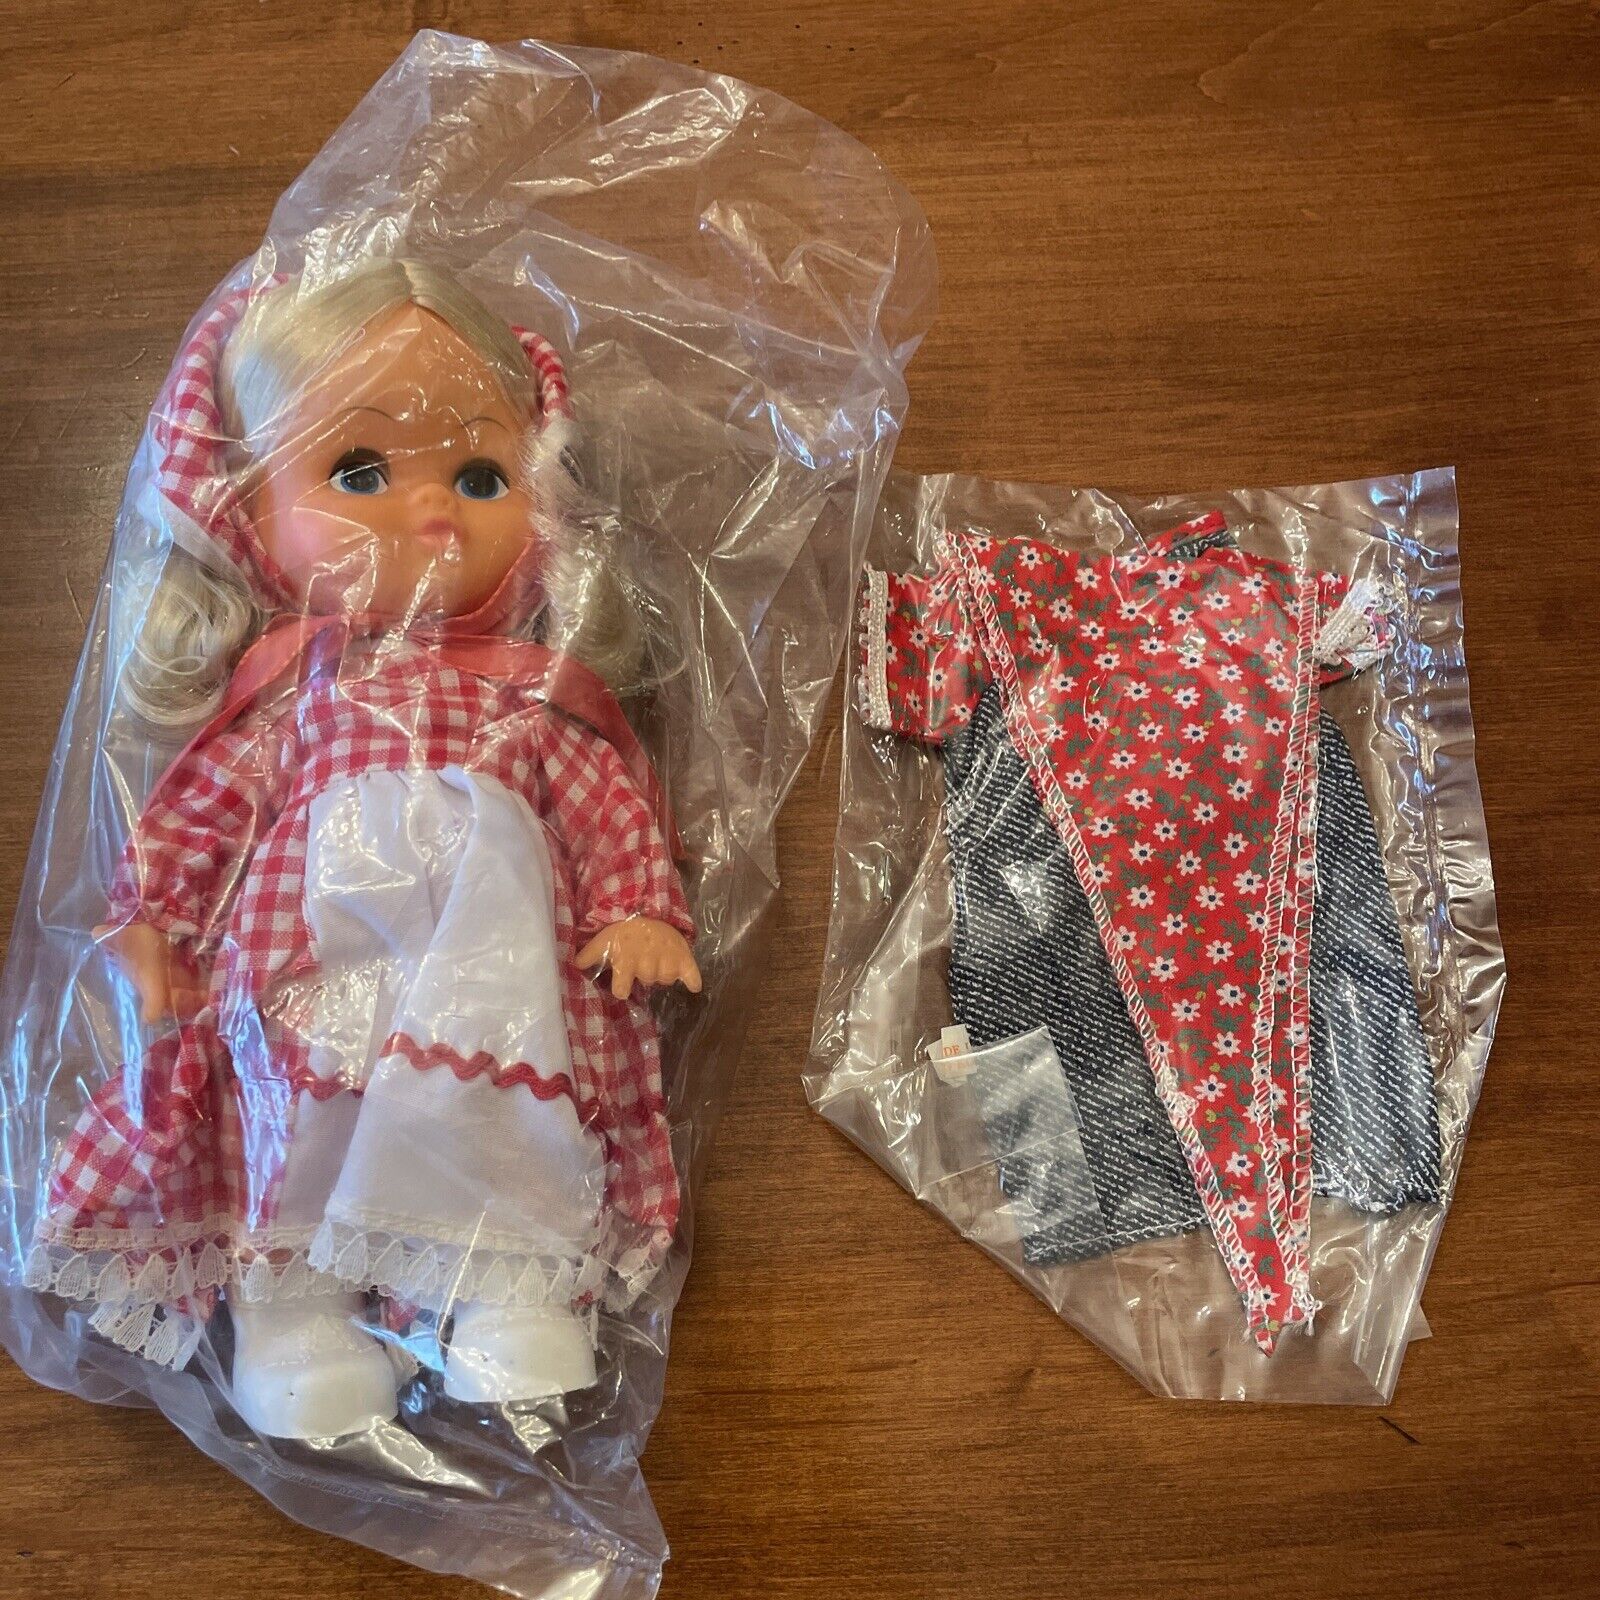 NIB Vtg Kellogg's Sweetheart of the Corn Doll with Extra Outfit Red Checks, 1979